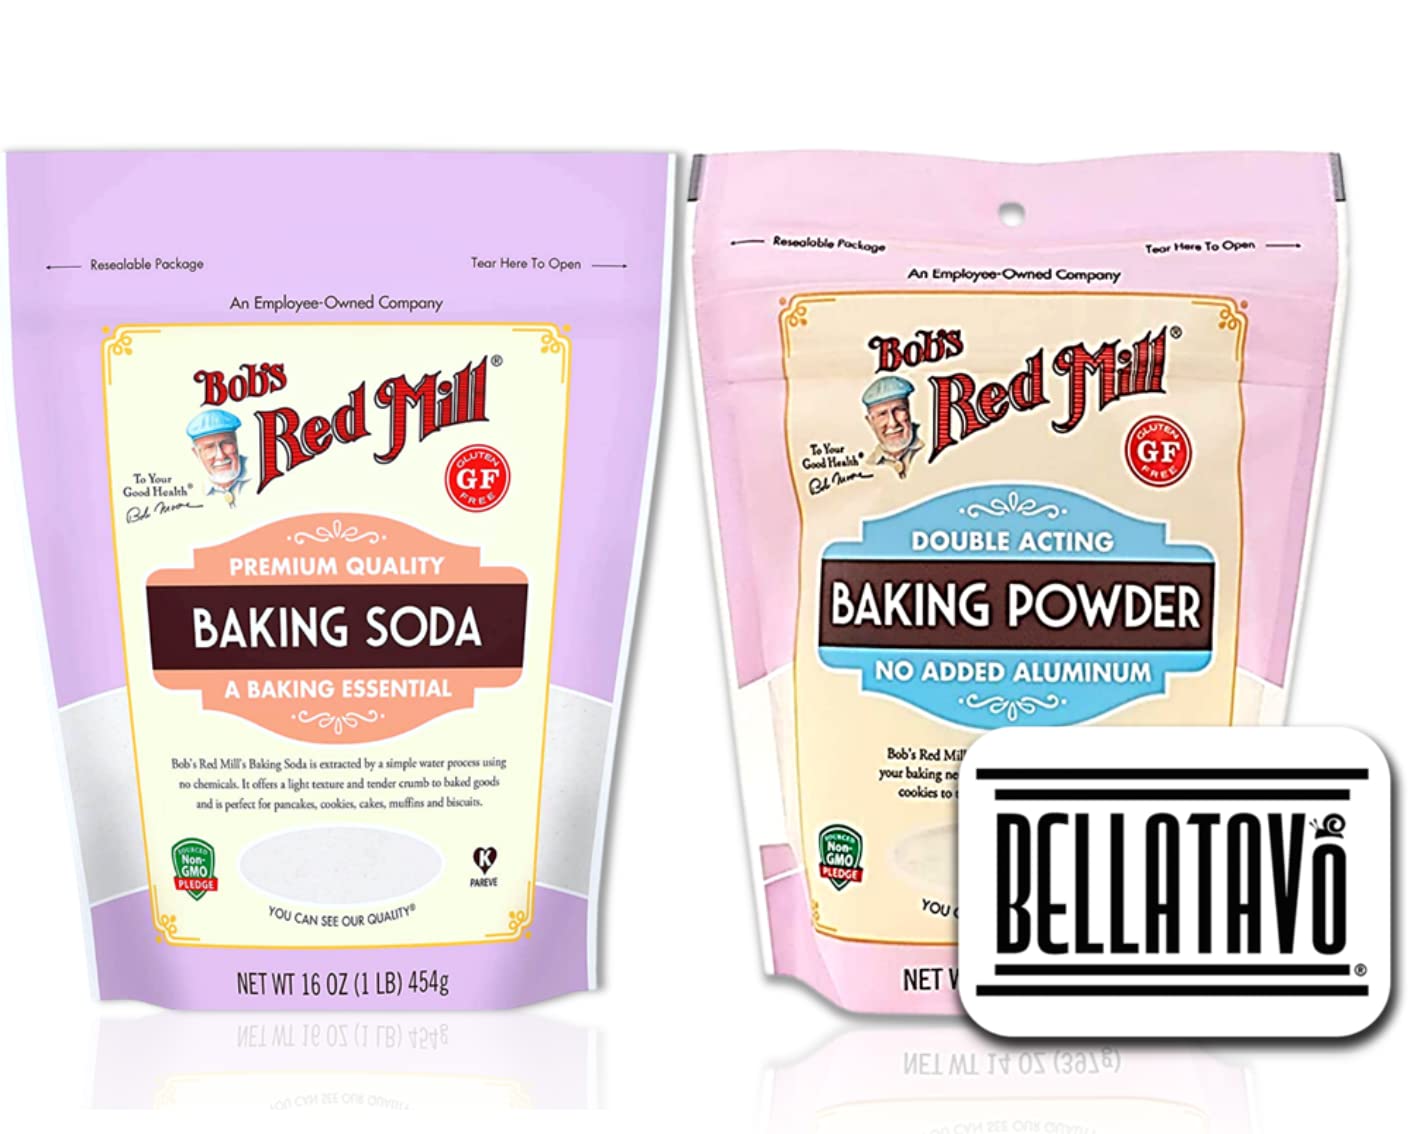 Gluten Free Soda and Baking Powder Bundle. Includes One-14oz Bobs Double Acting